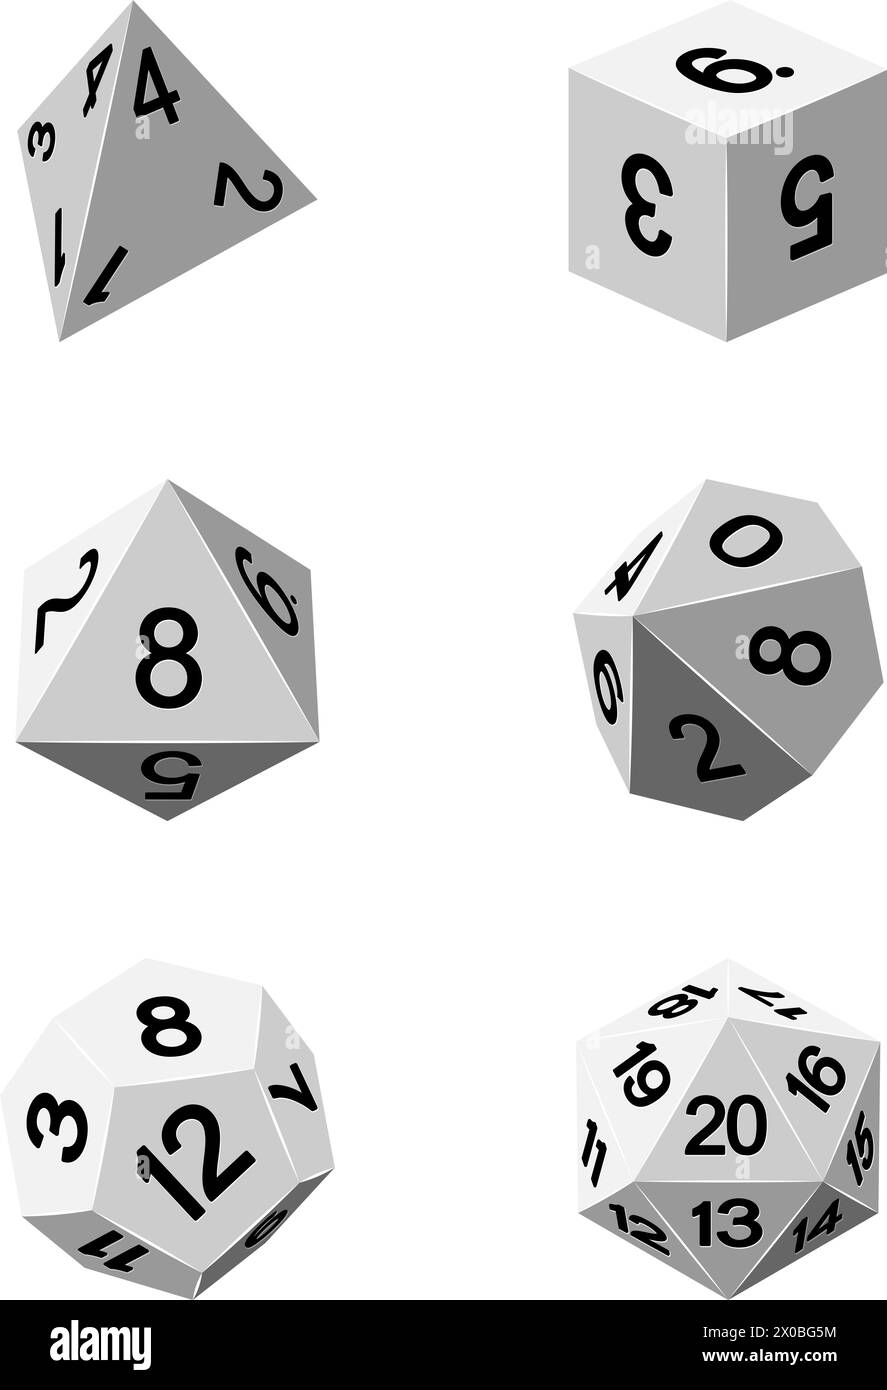 Game Dice Illustration Roleplaying Board Game Set Stock Vector